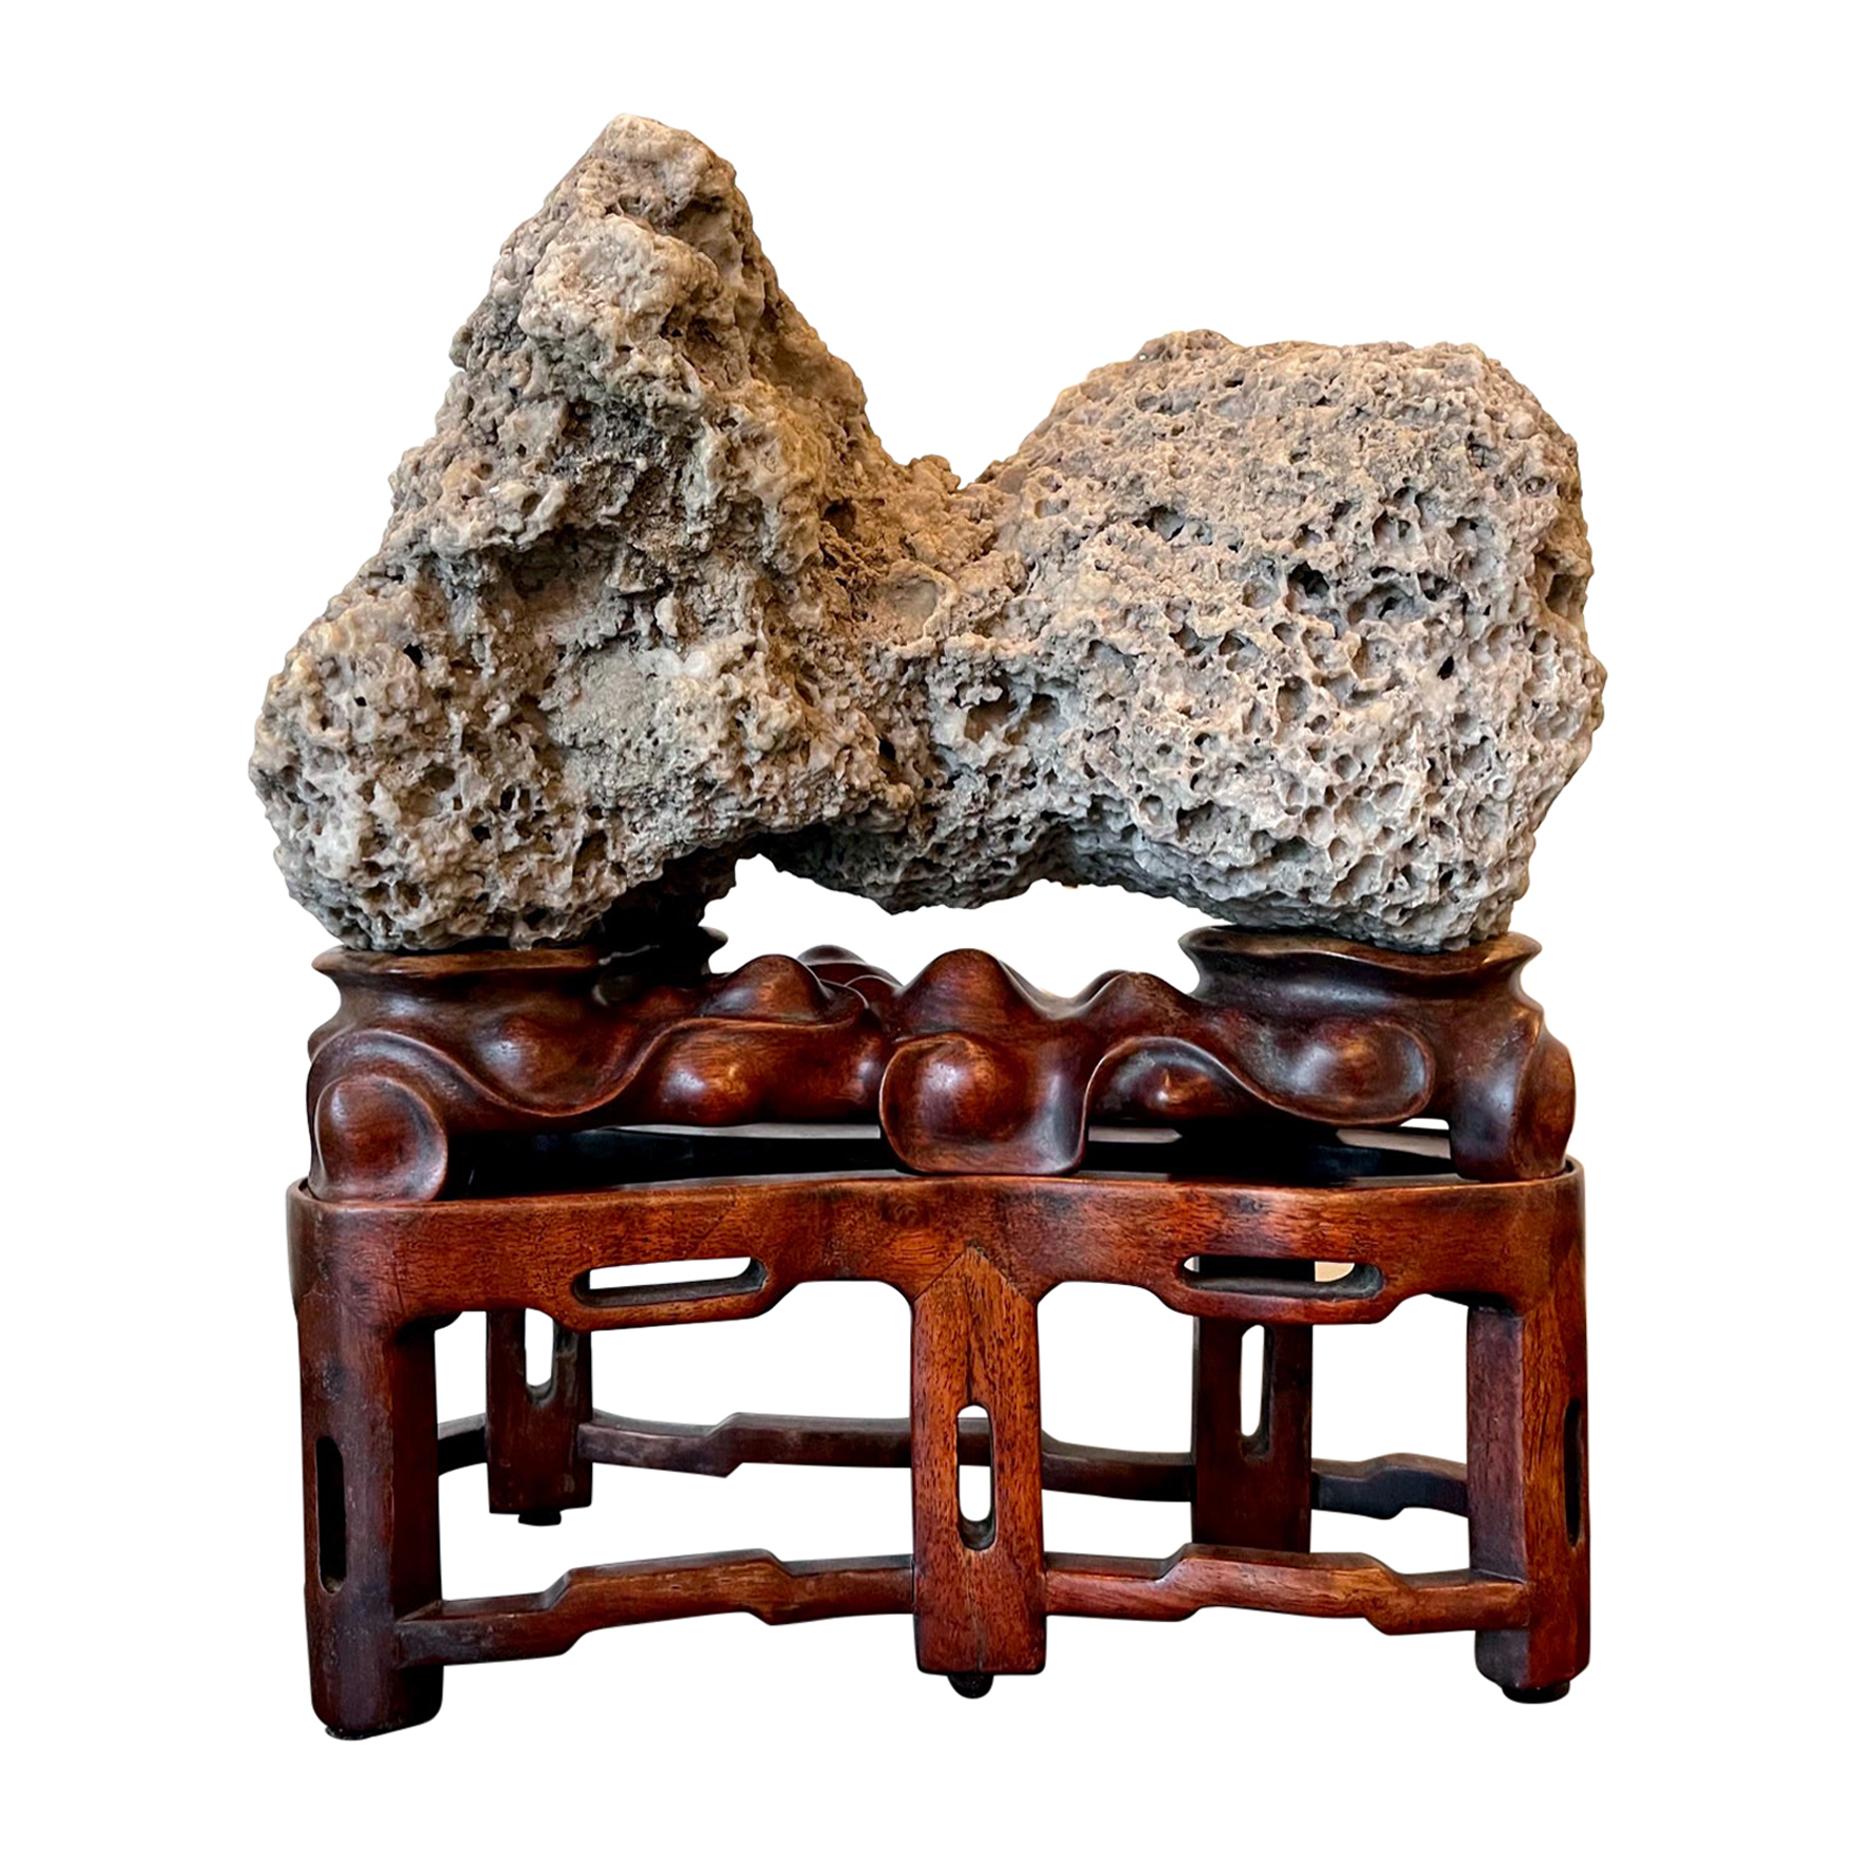 Chinese Scholar Rock Kun Stone on Display Stand